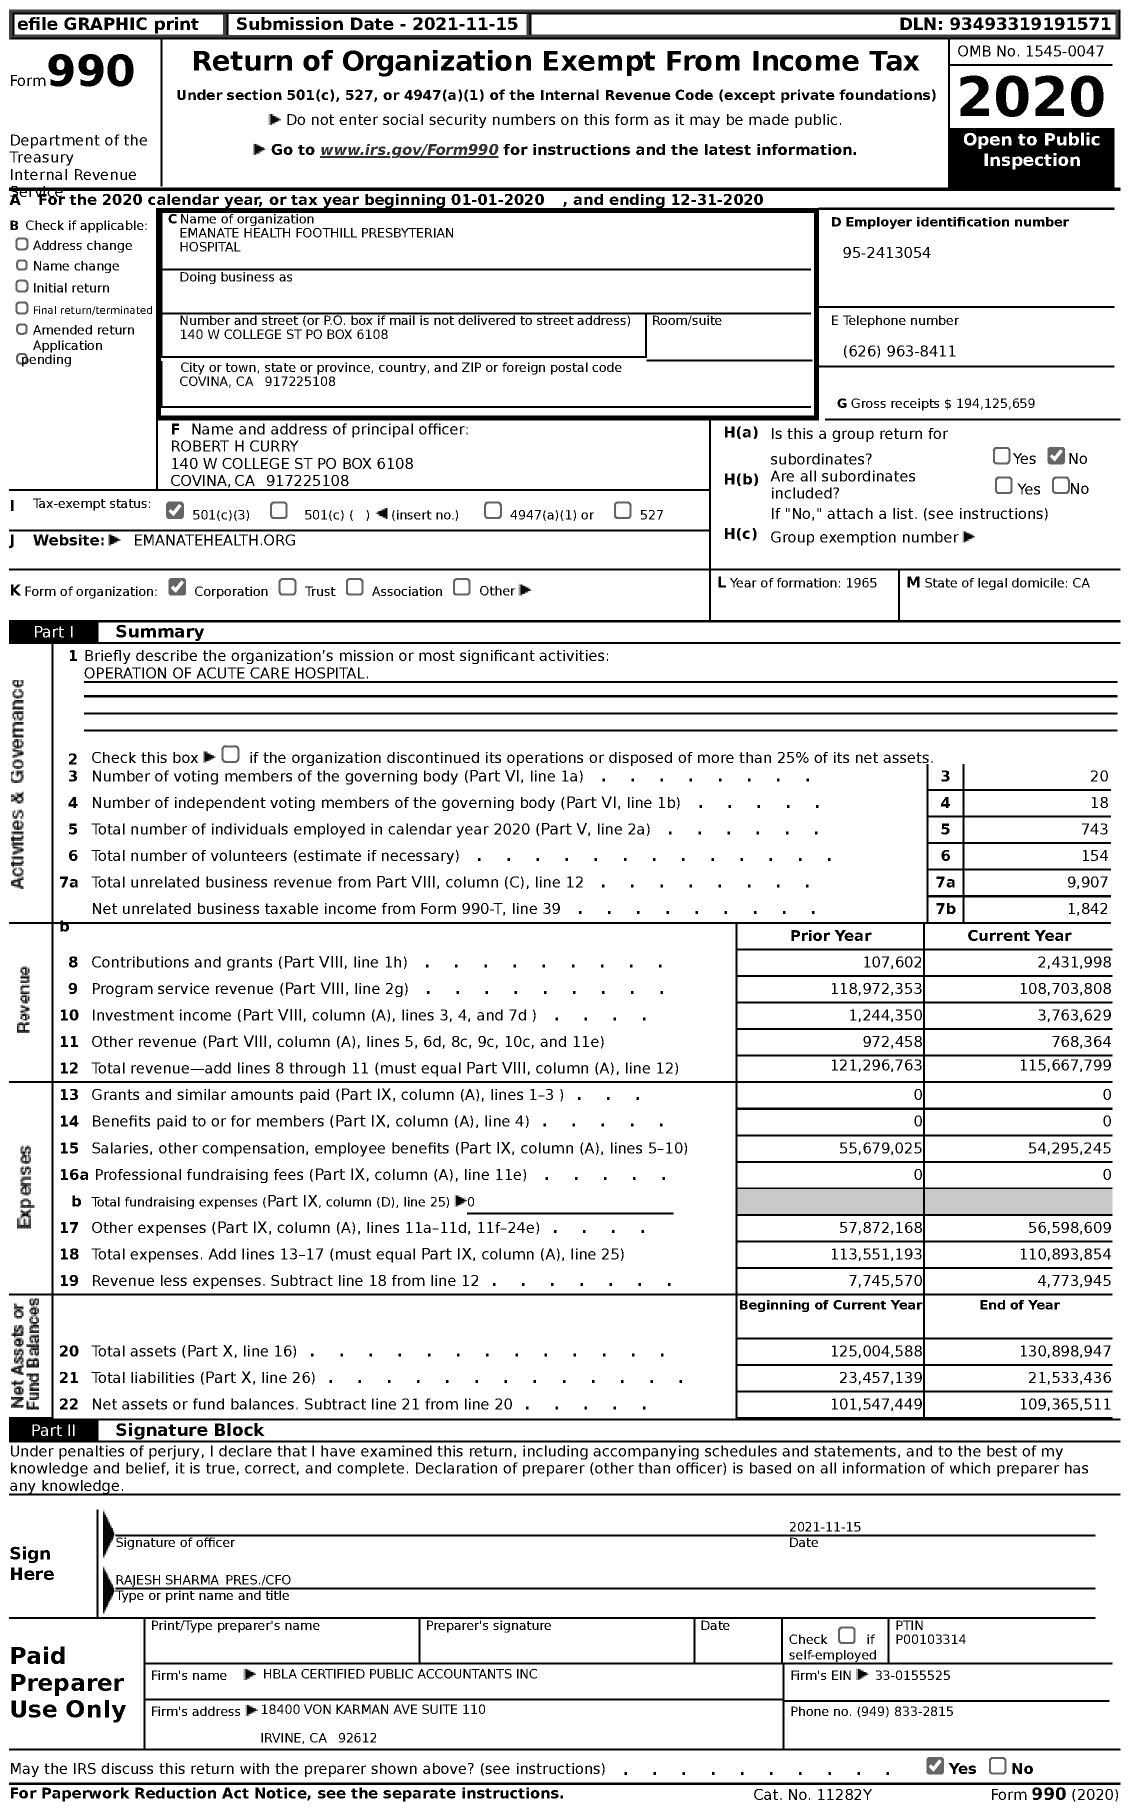 Image of first page of 2020 Form 990 for Emanate Health Foothill Presbyterian Hospital